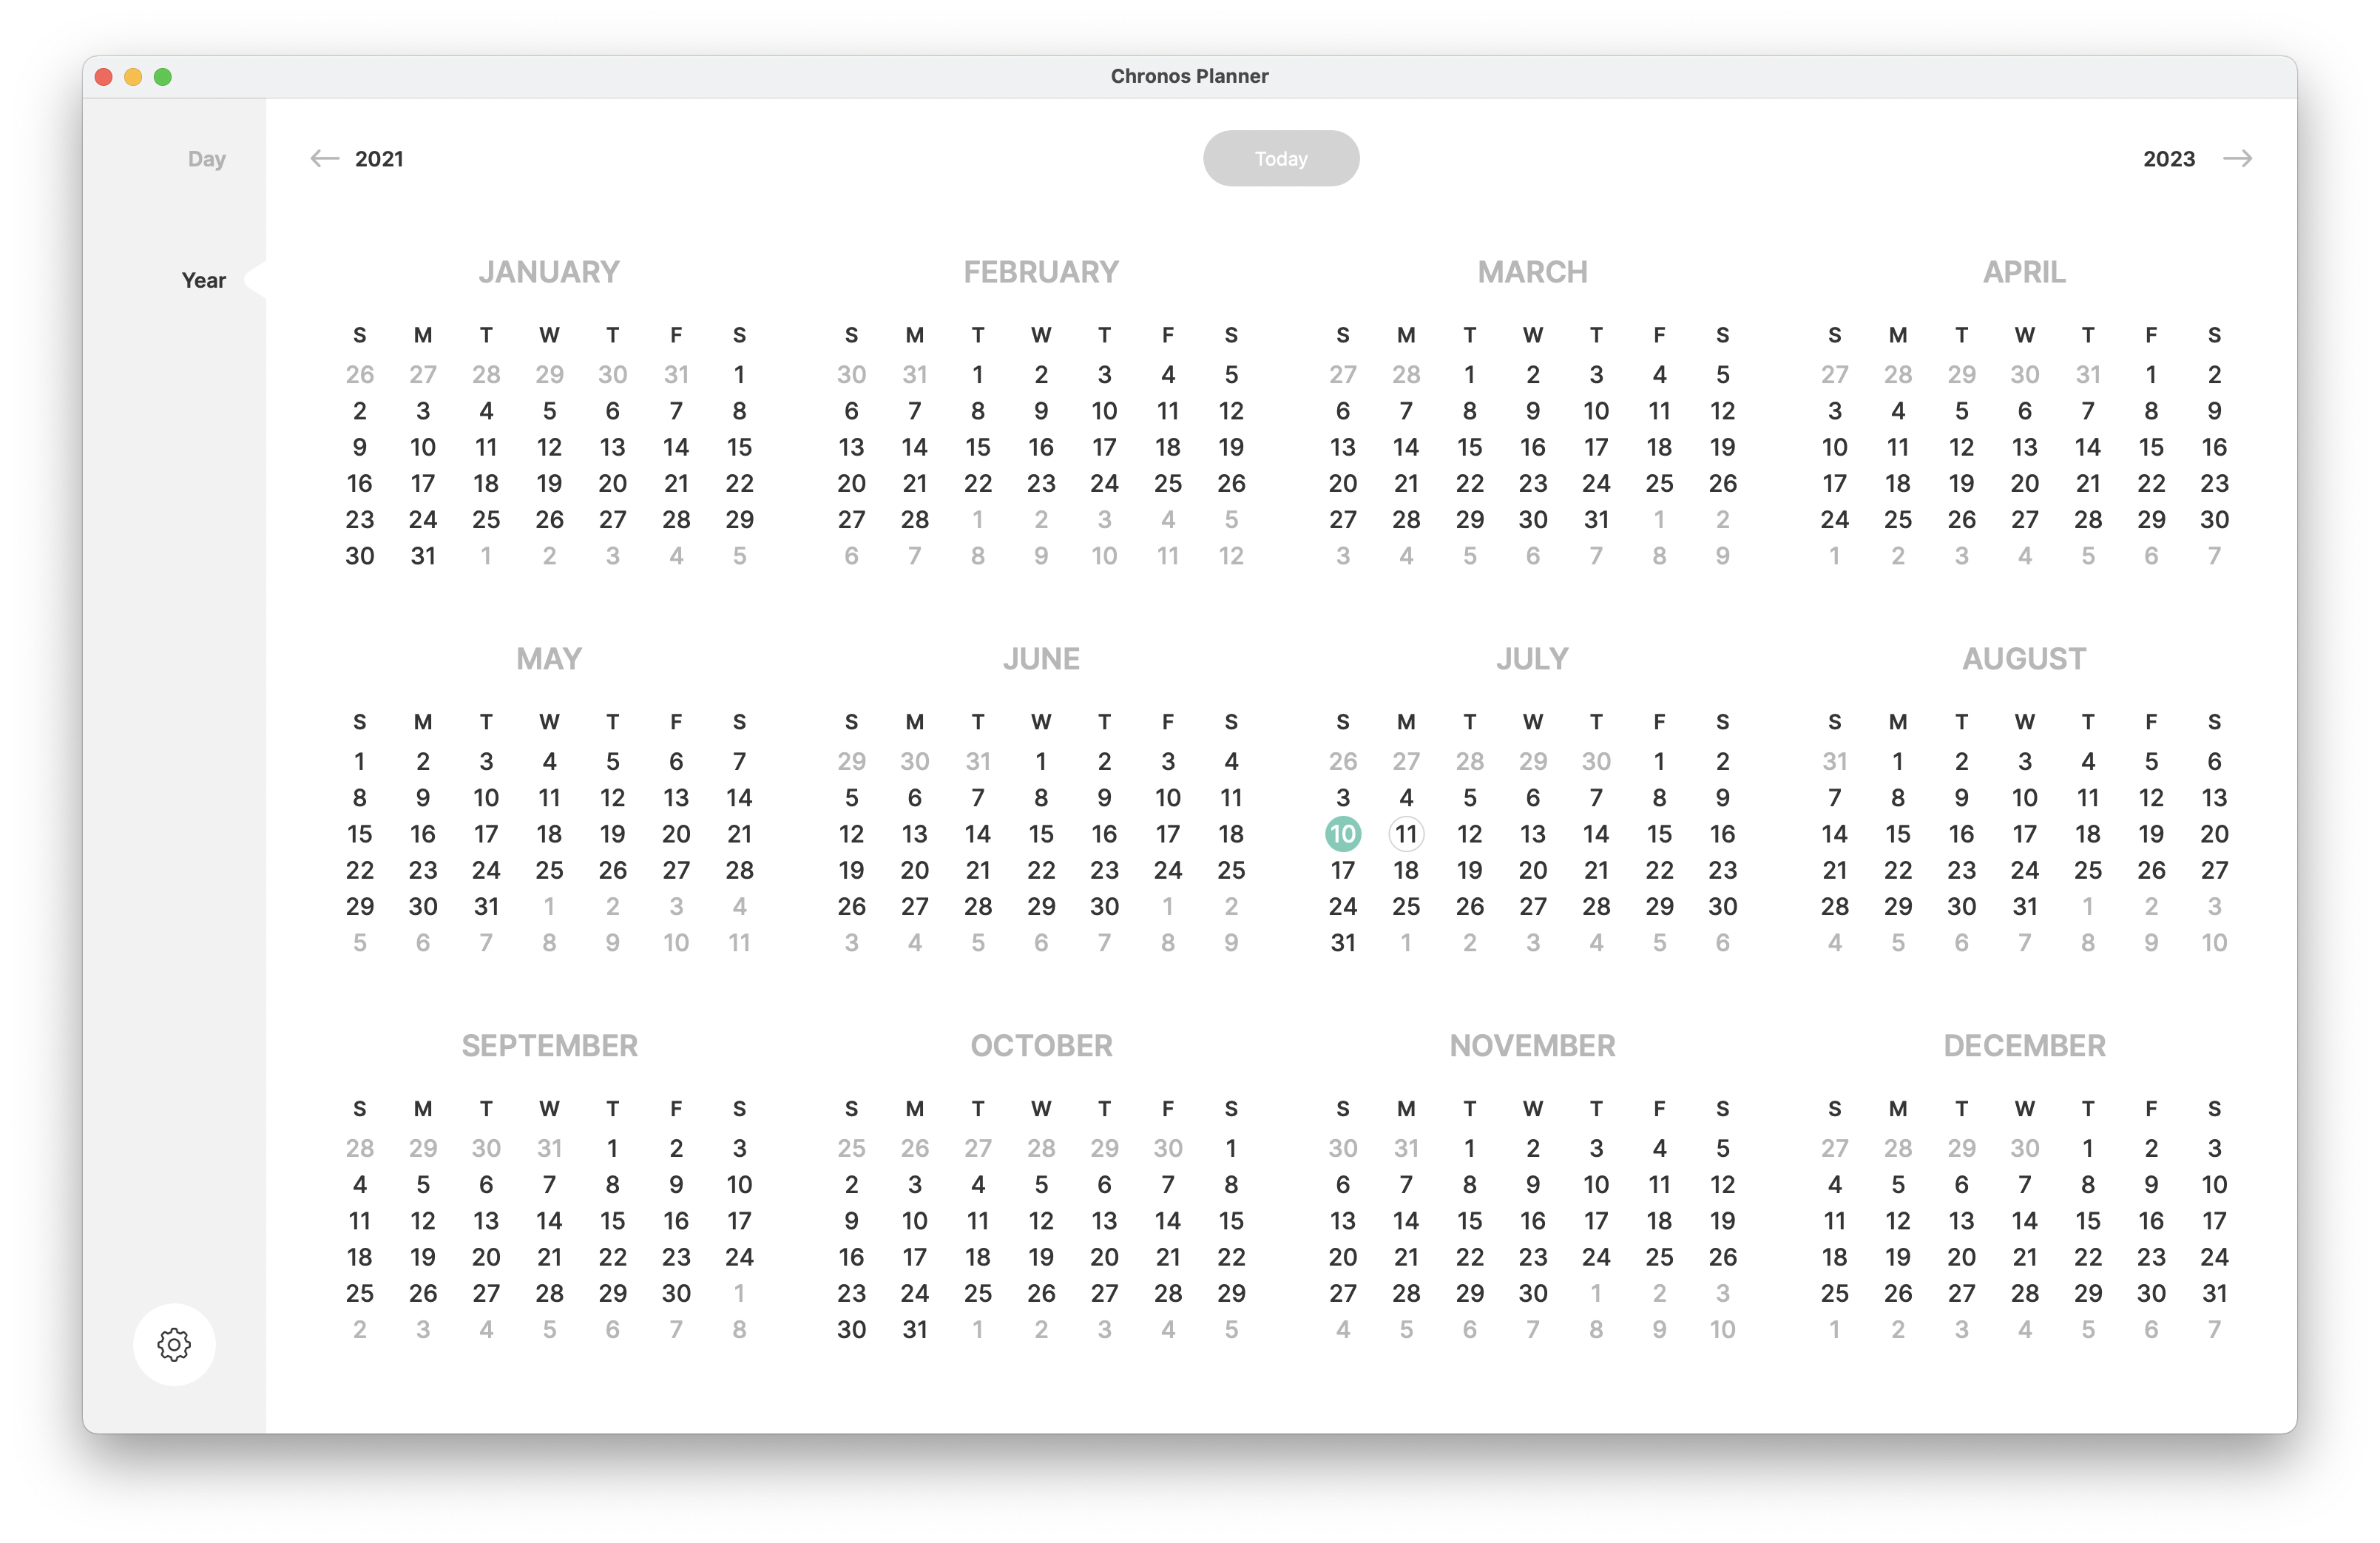 Screenshot of the Chronos Planner app demonstrating the ability to select any date via the Year View